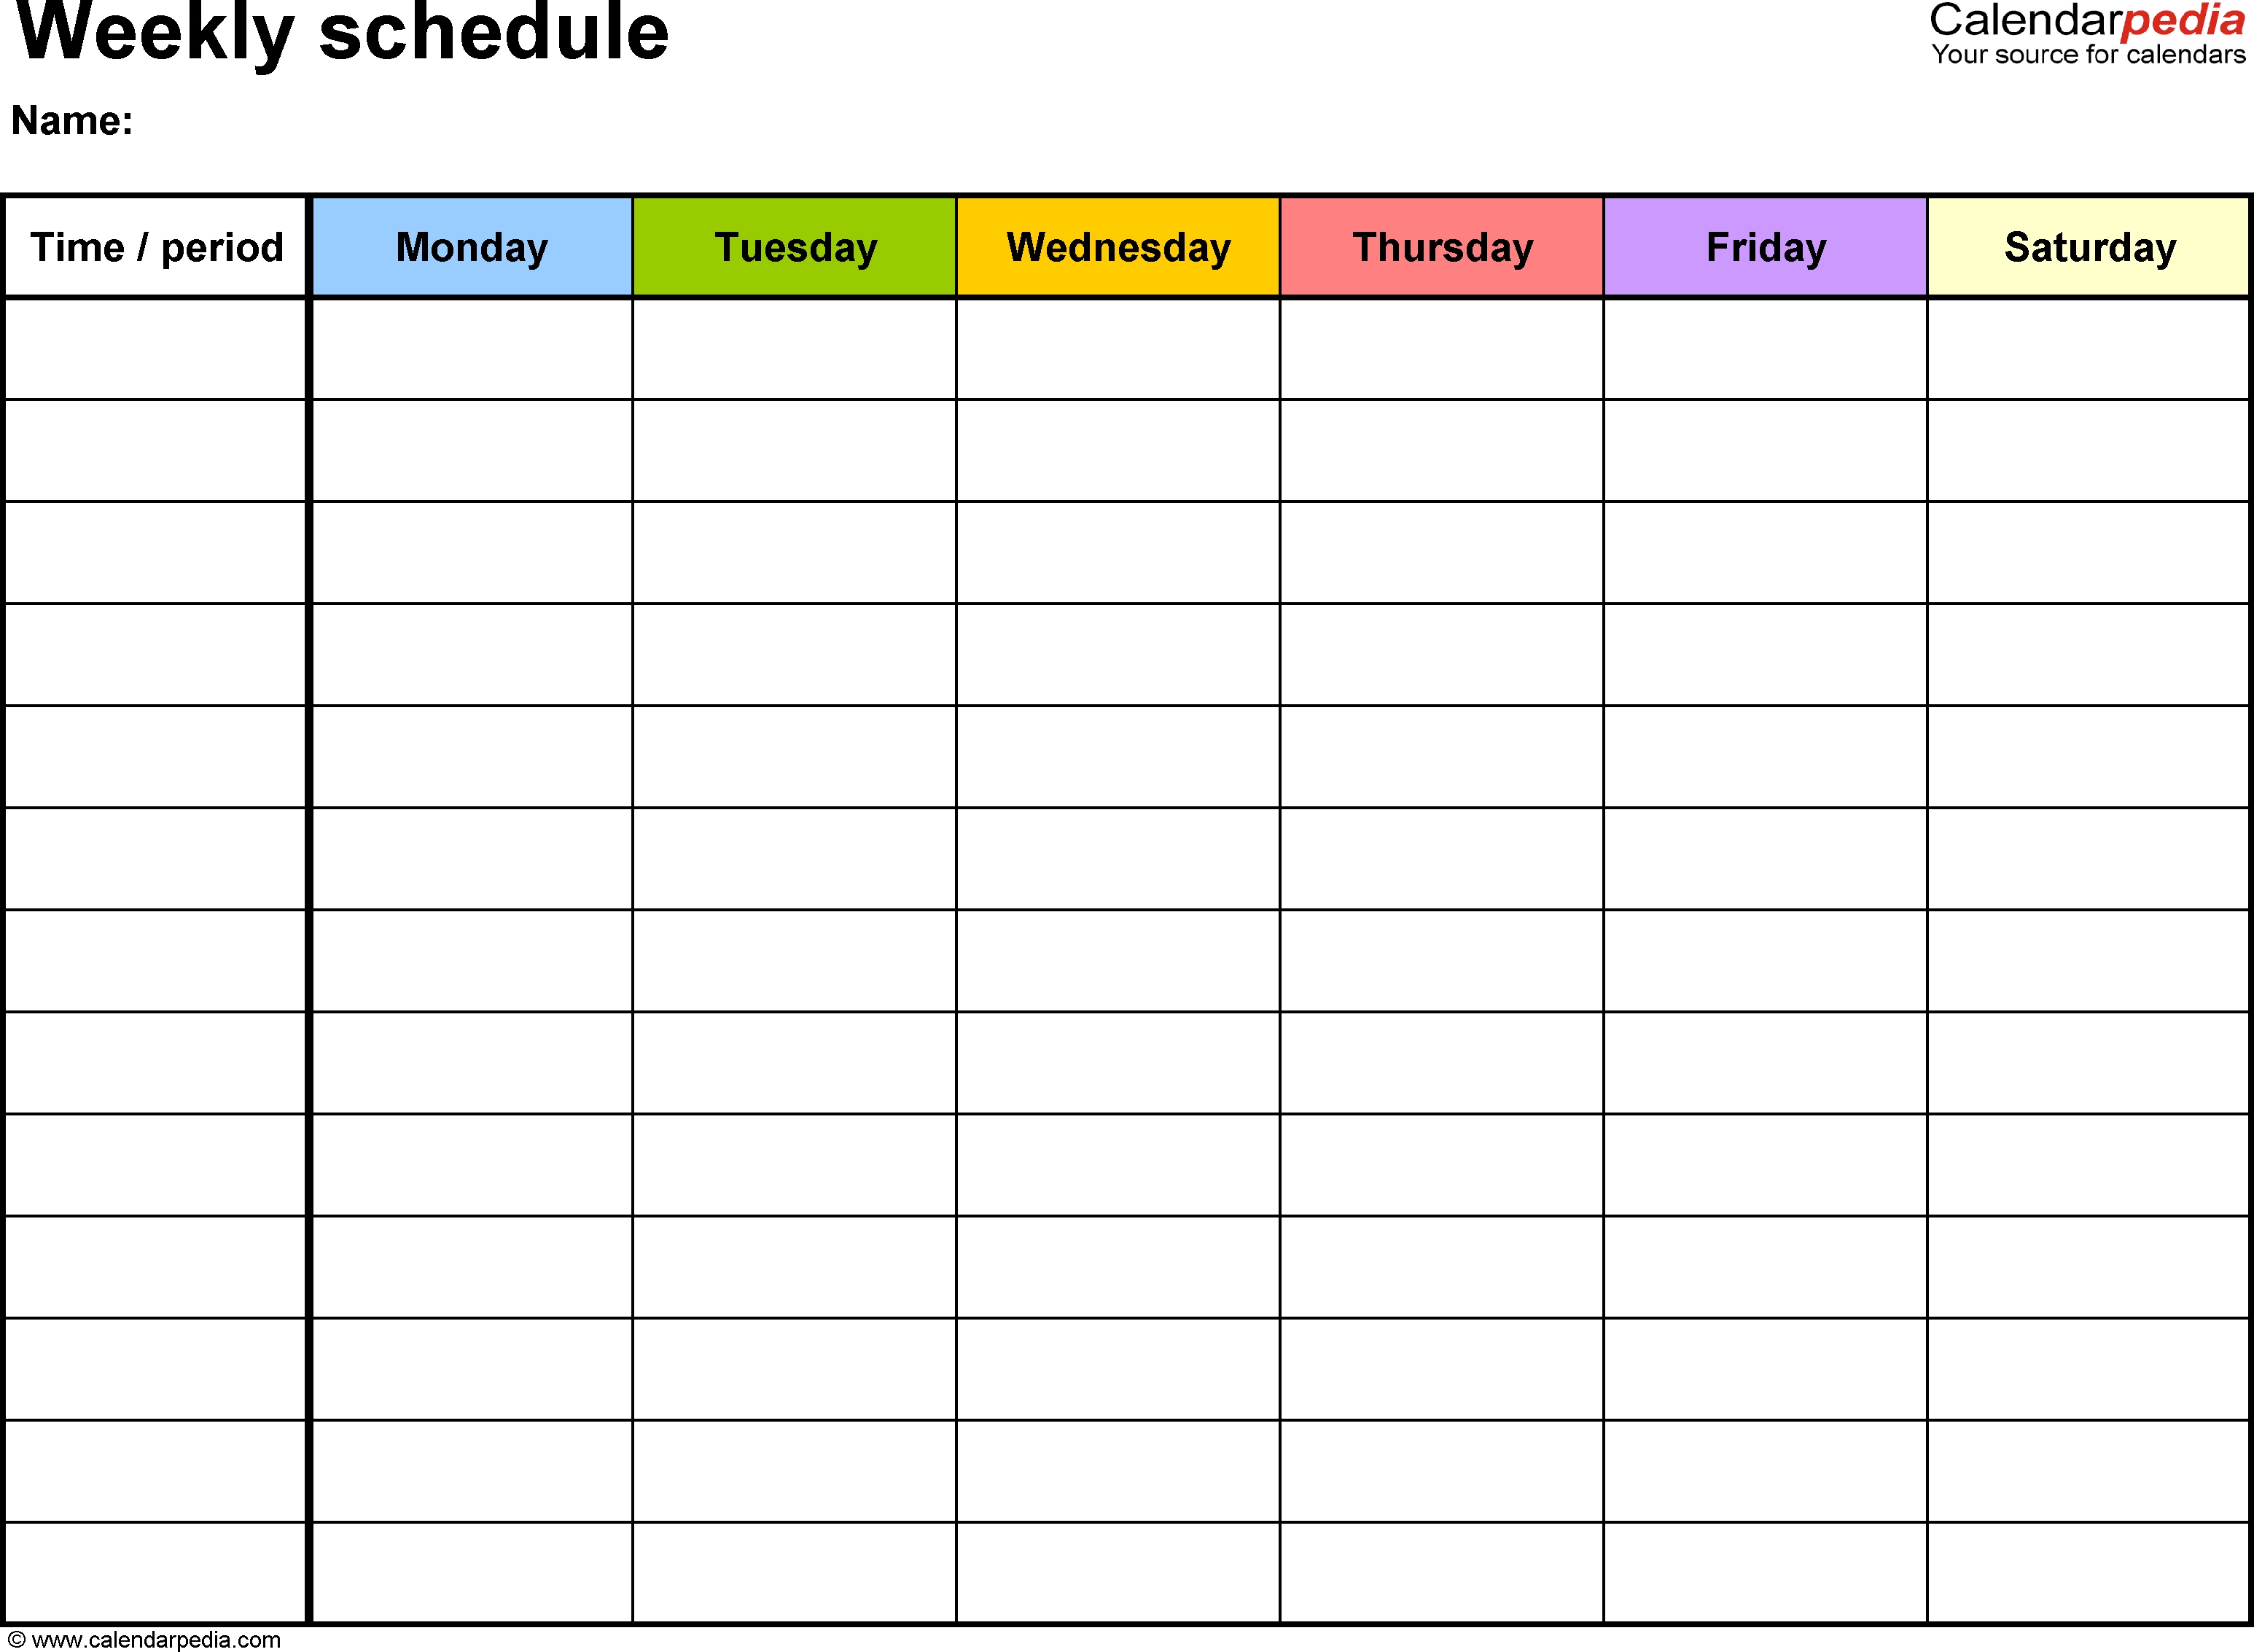 Free Weekly Schedule Templates For Word - 18 Templates  Free Monday Through Friday Calendar Template